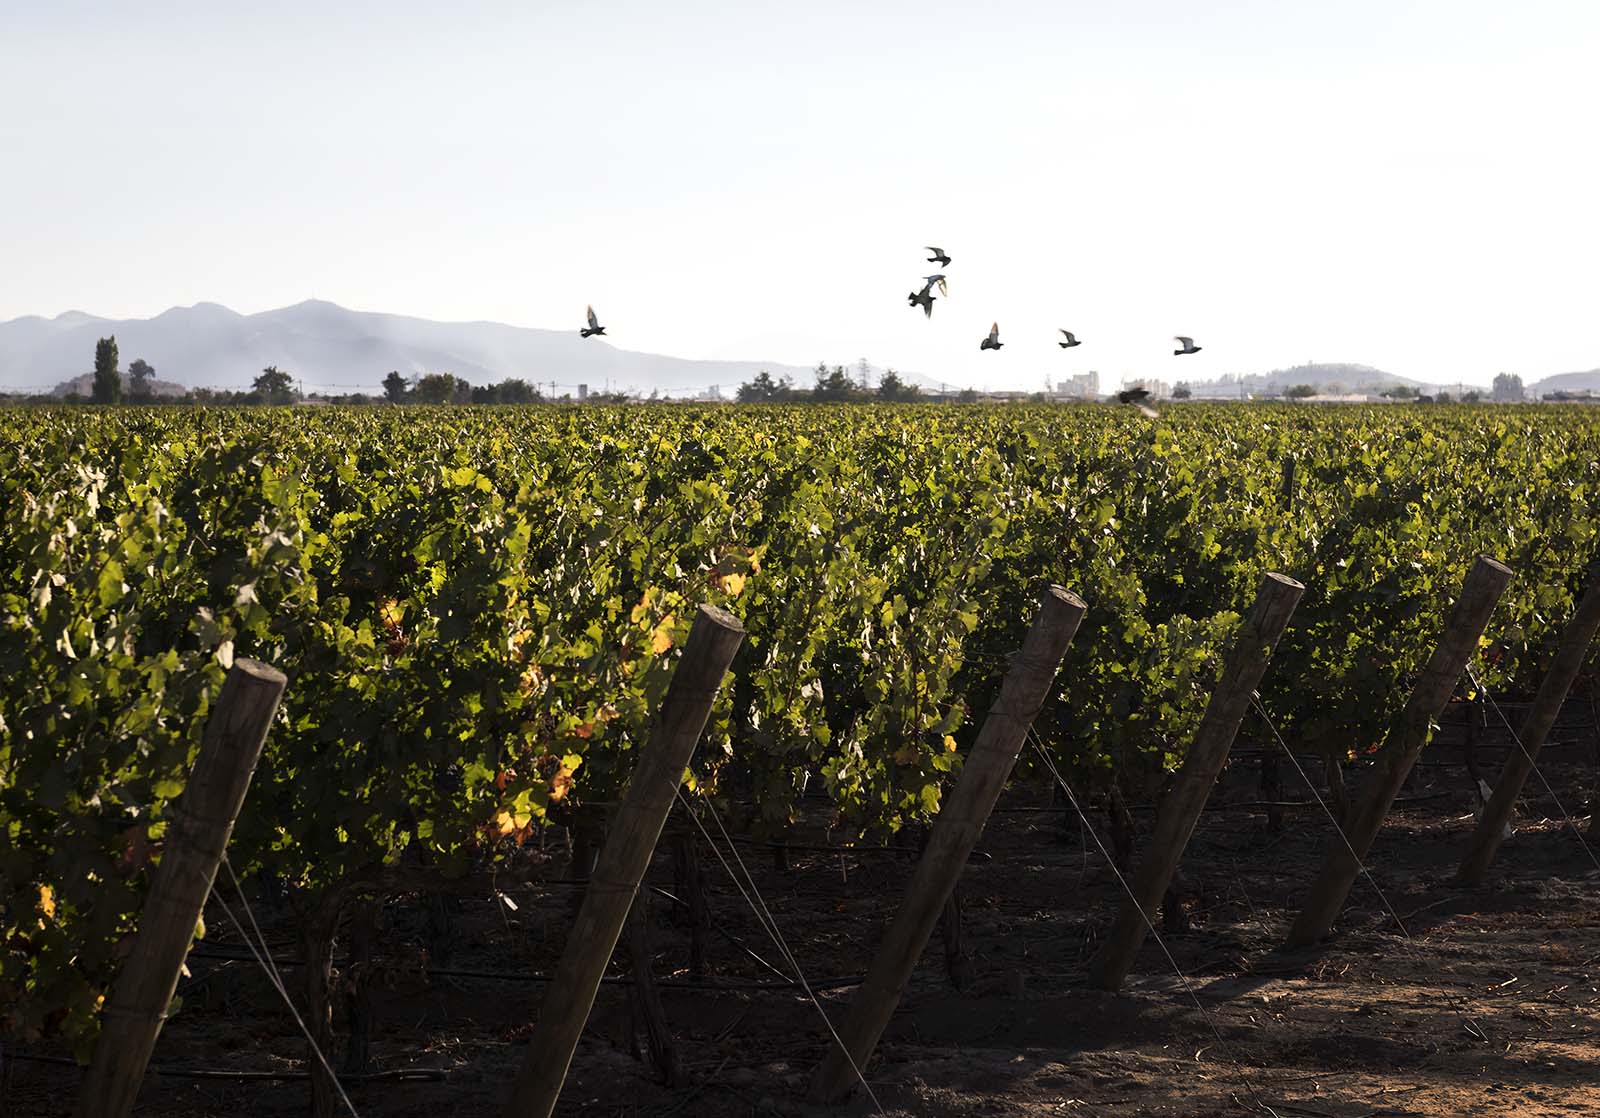 A photograph of the Maipo Valley vineyards, in which birds can be seen flying over top dense vine rows. Mountains can be seen in the background, covered by a light fog. 